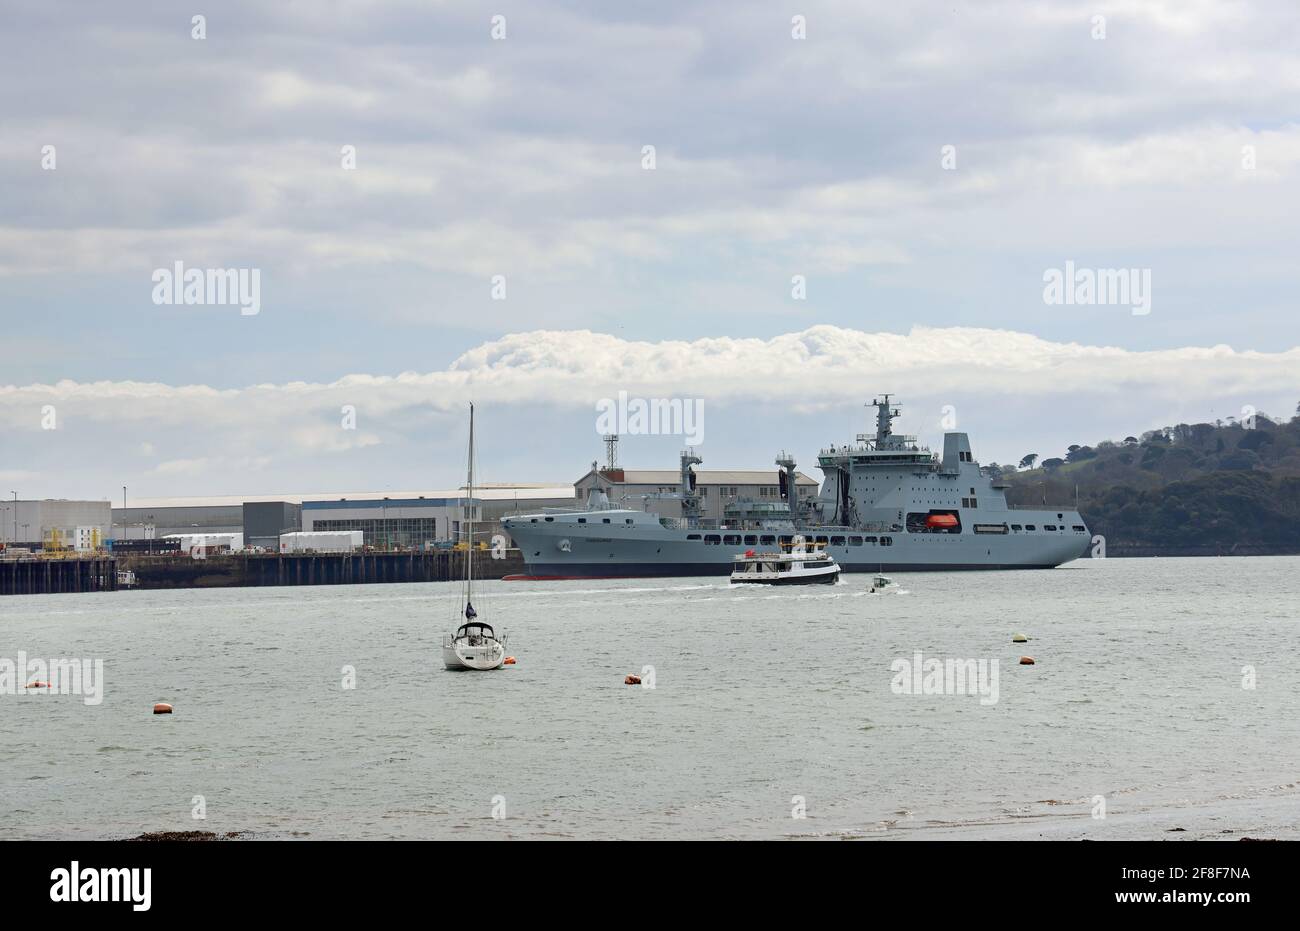 RFA Tidesurge berthed at South Yard, Devonport. South Yard Devonport is included in the Freeport Status announced for Plymouth in March 2021 Stock Photo